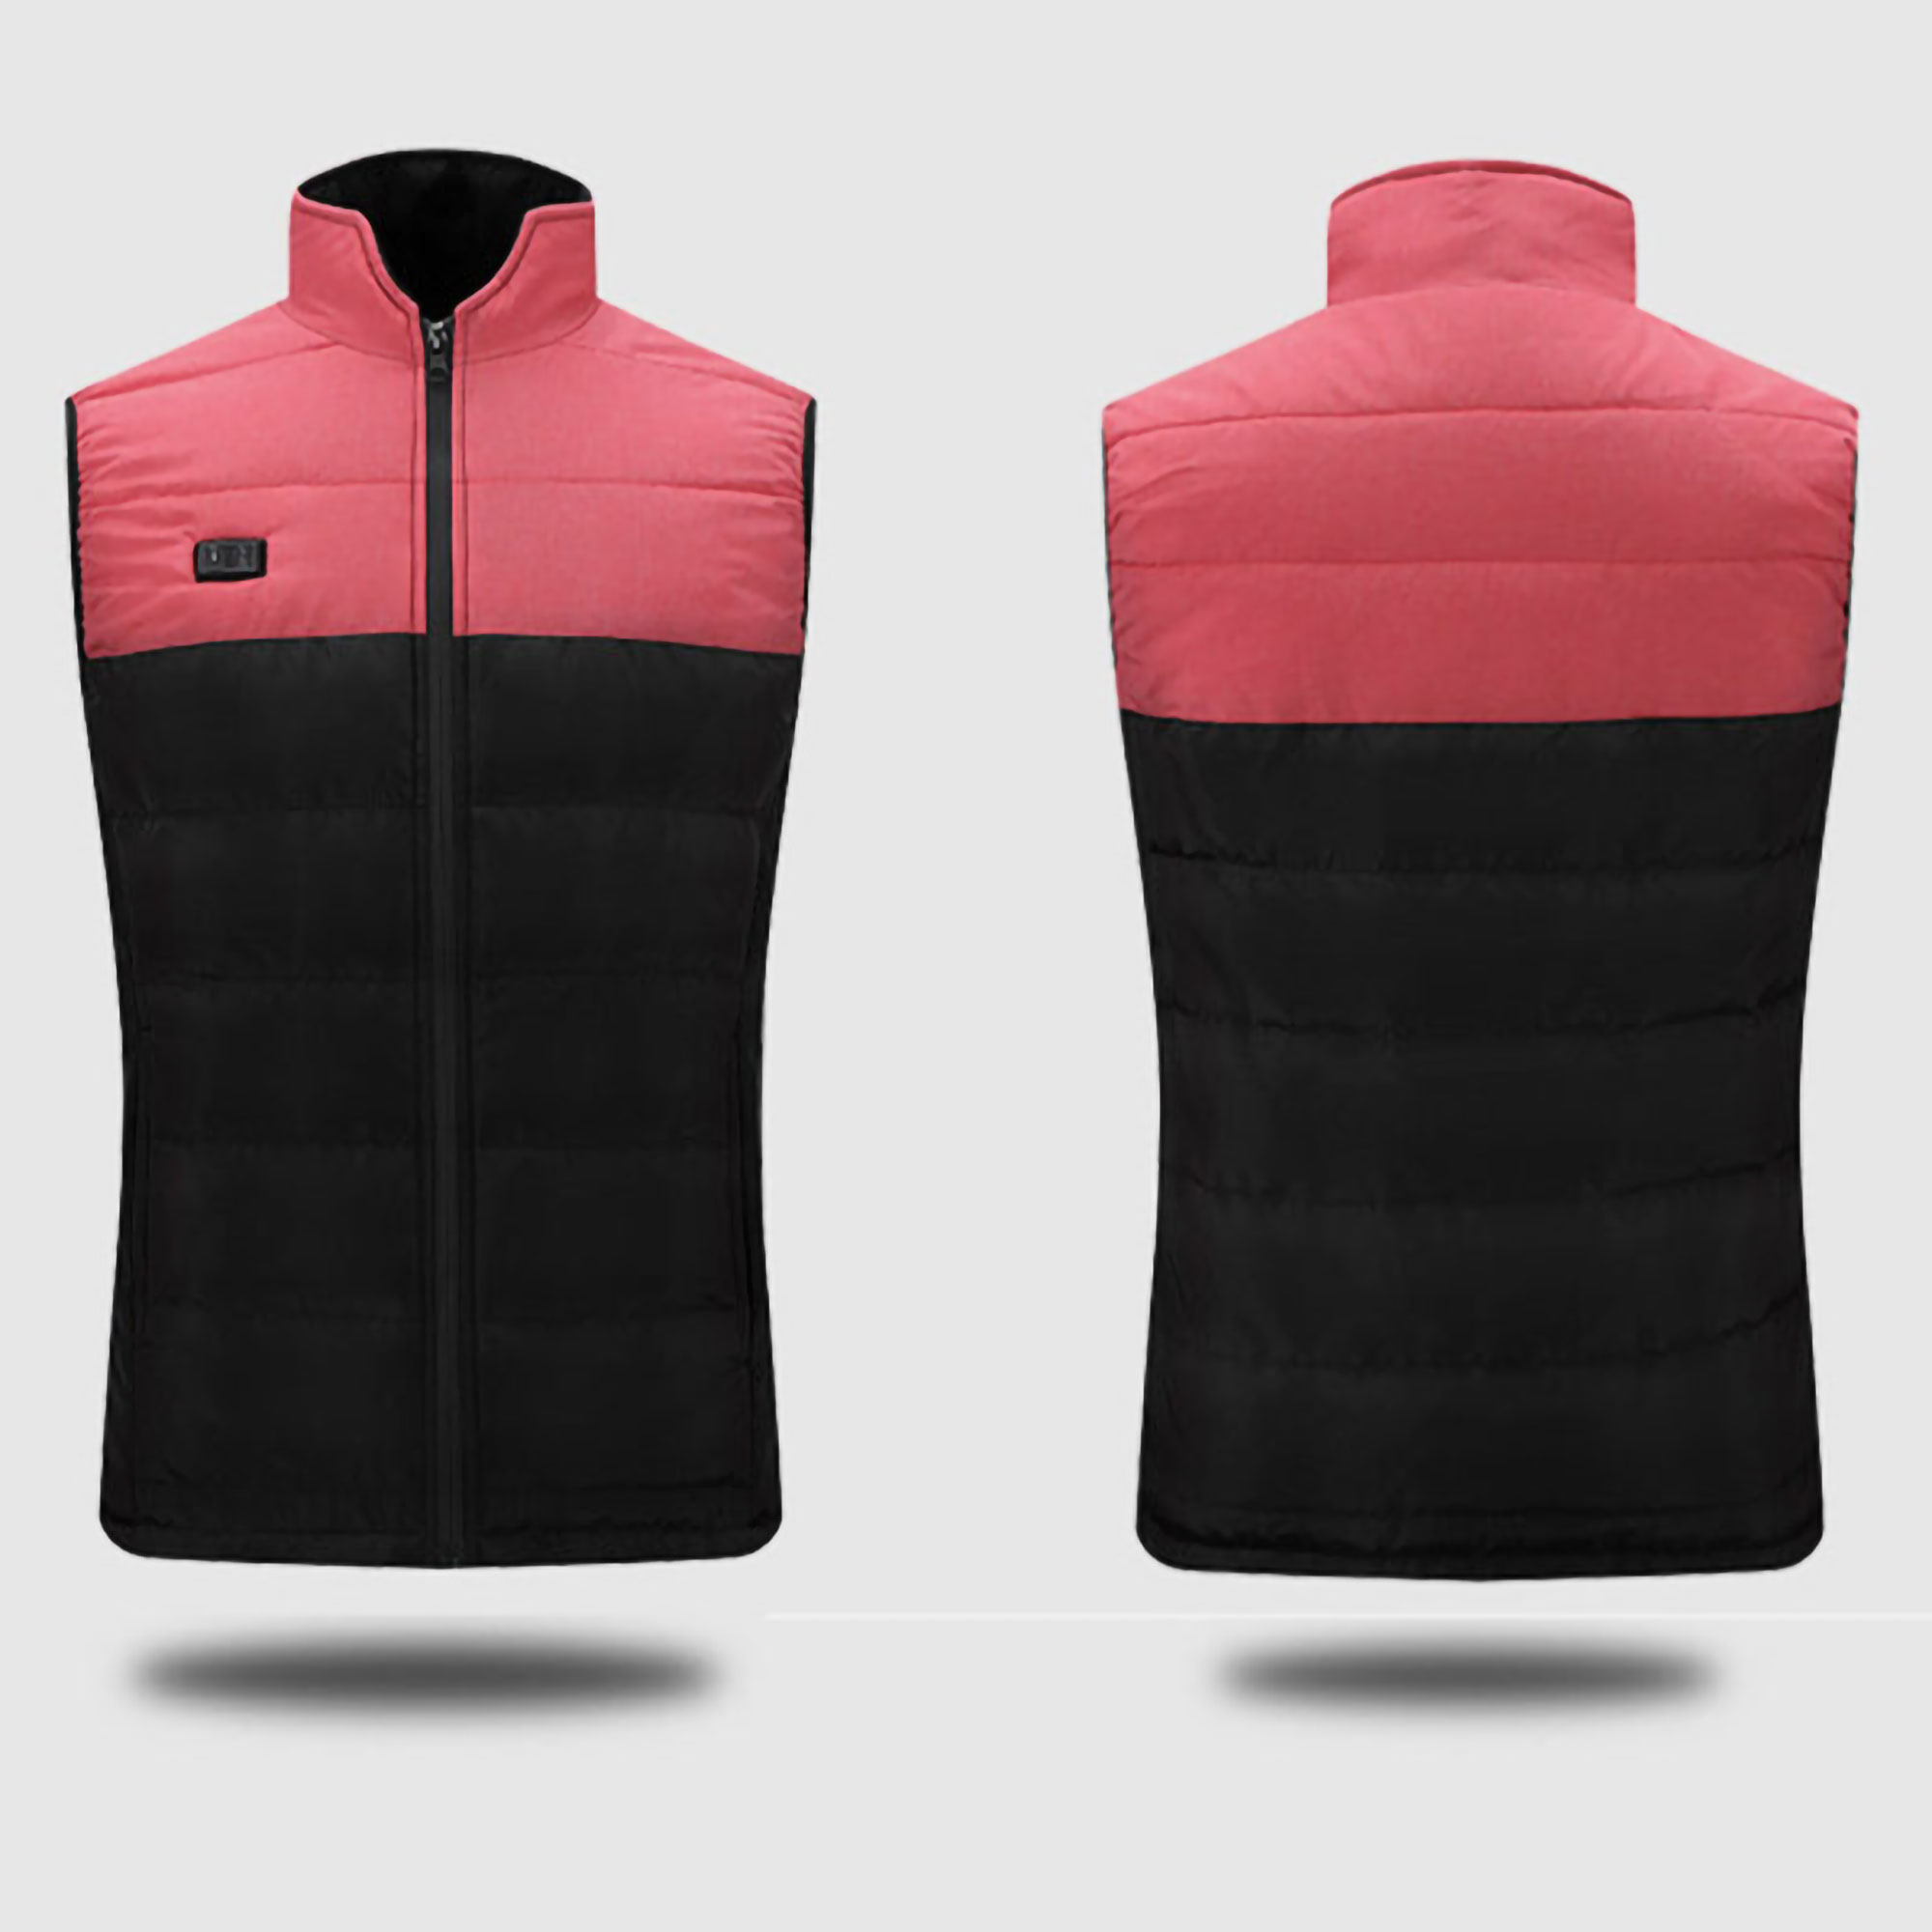 Sexy Dance Electric Heated Vest for Men Women Heating Jacket Sleeveless Zipper Coat Lightweight Thermal Outwear With 10000mHA Power Bank - image 3 of 3